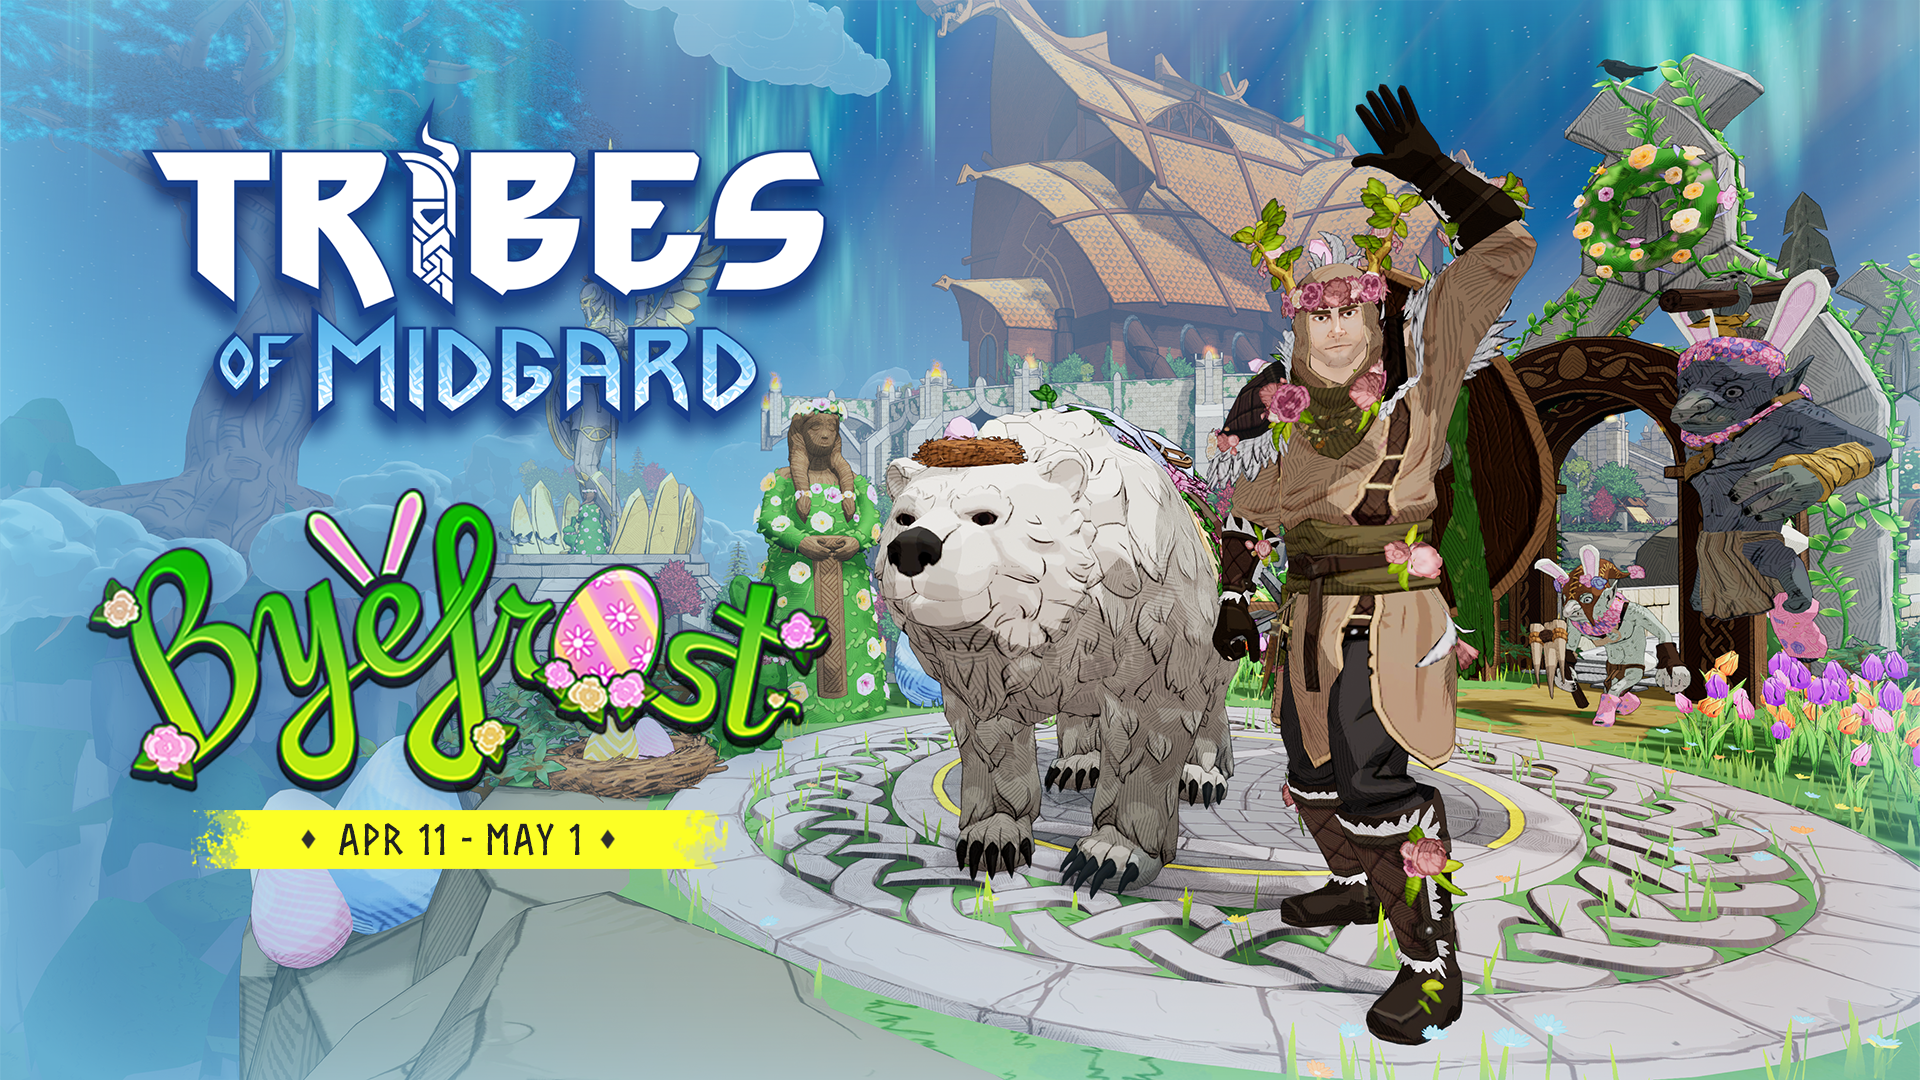 Tribes of Midgard at the best price